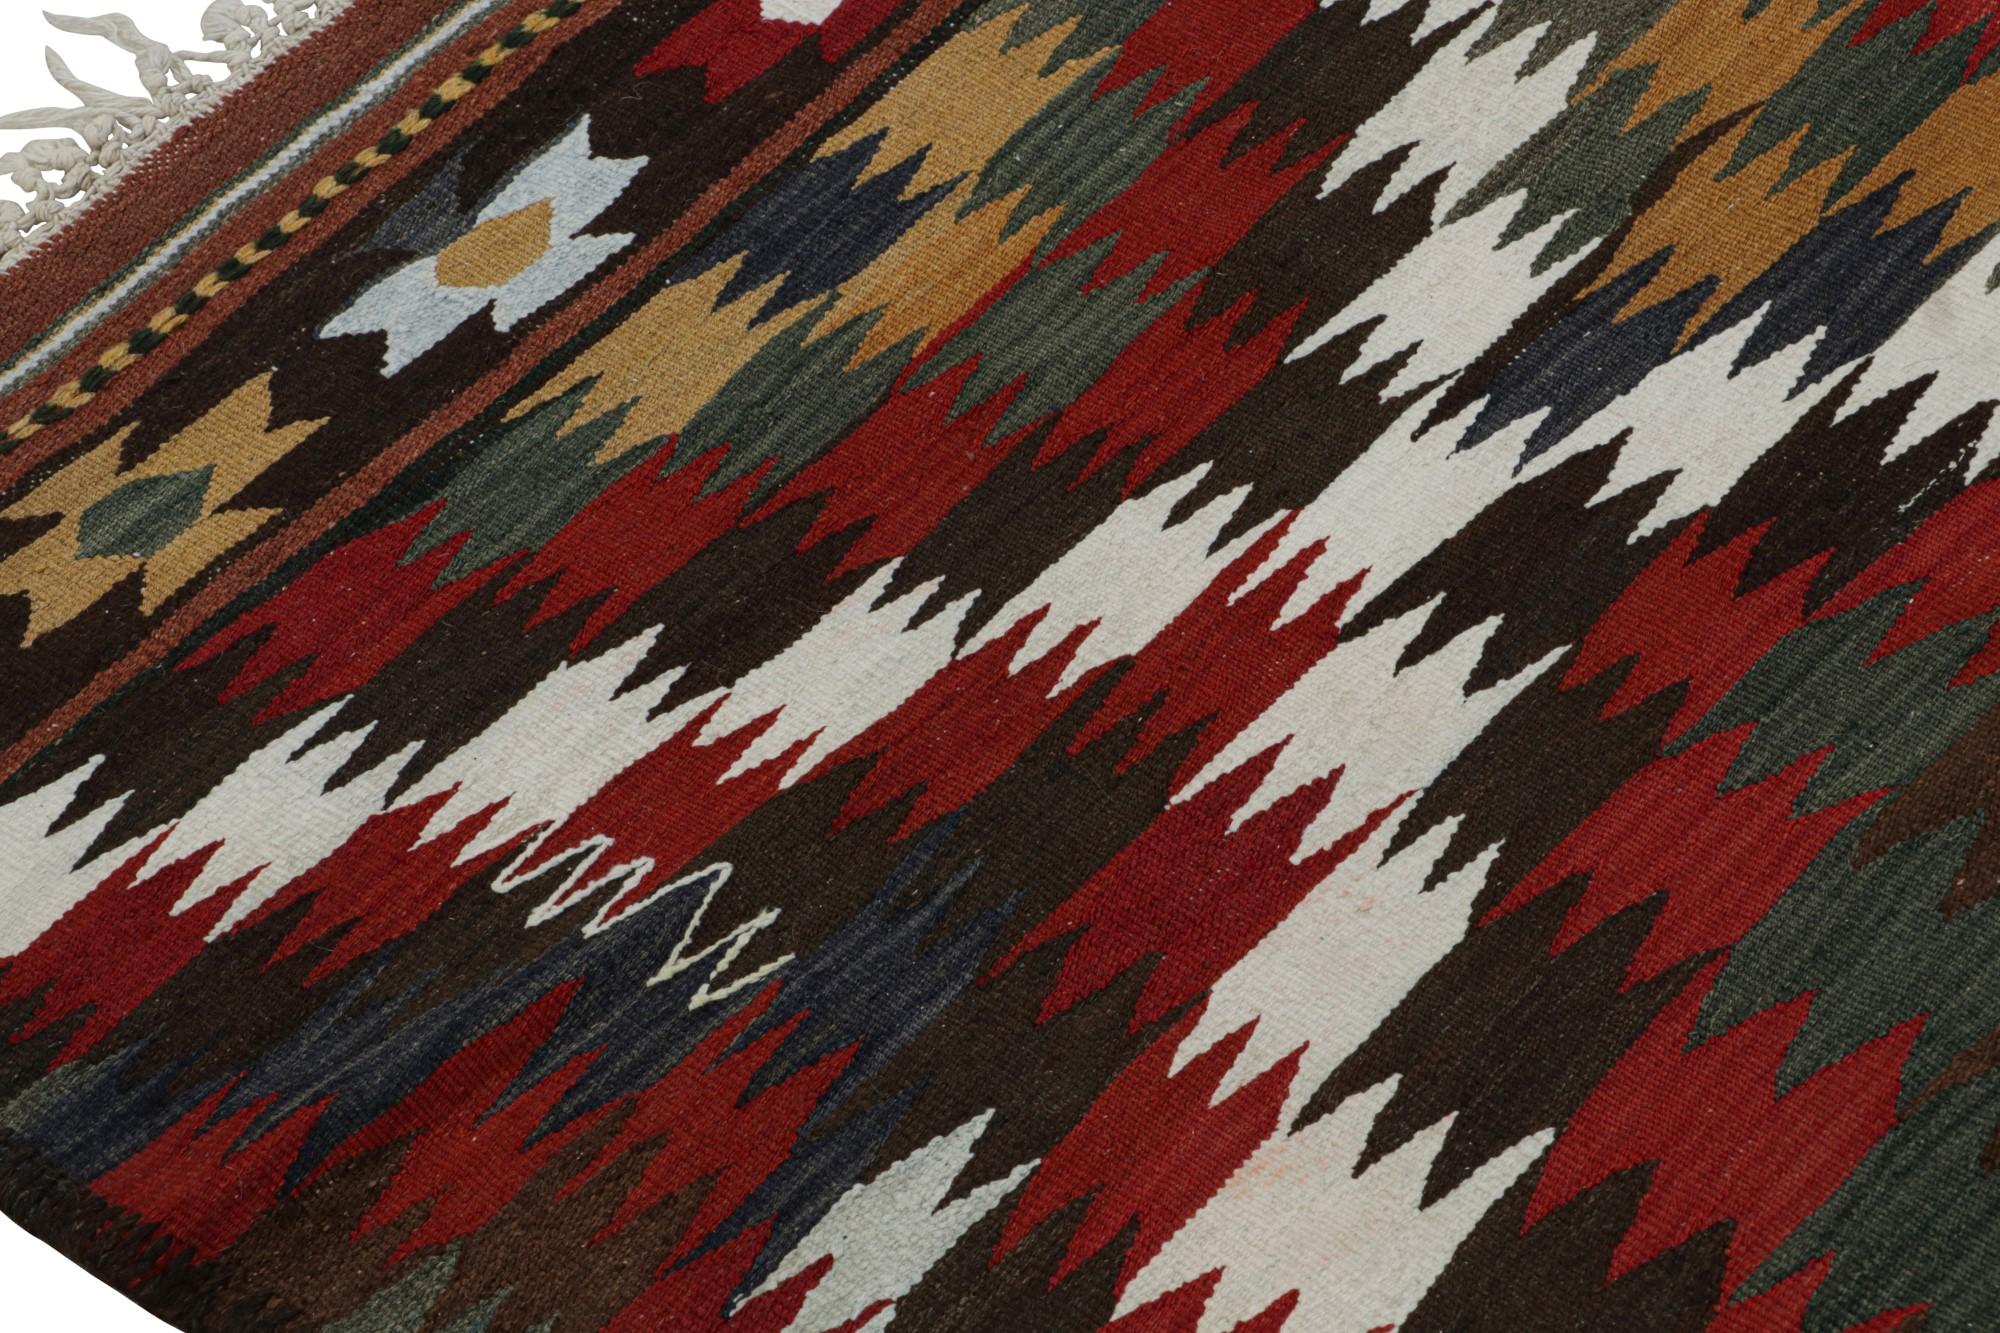 Mid-20th Century Vintage Afghan Tribal Kilim Rug, with Geometric Patterns, from Rug & Kilim  For Sale